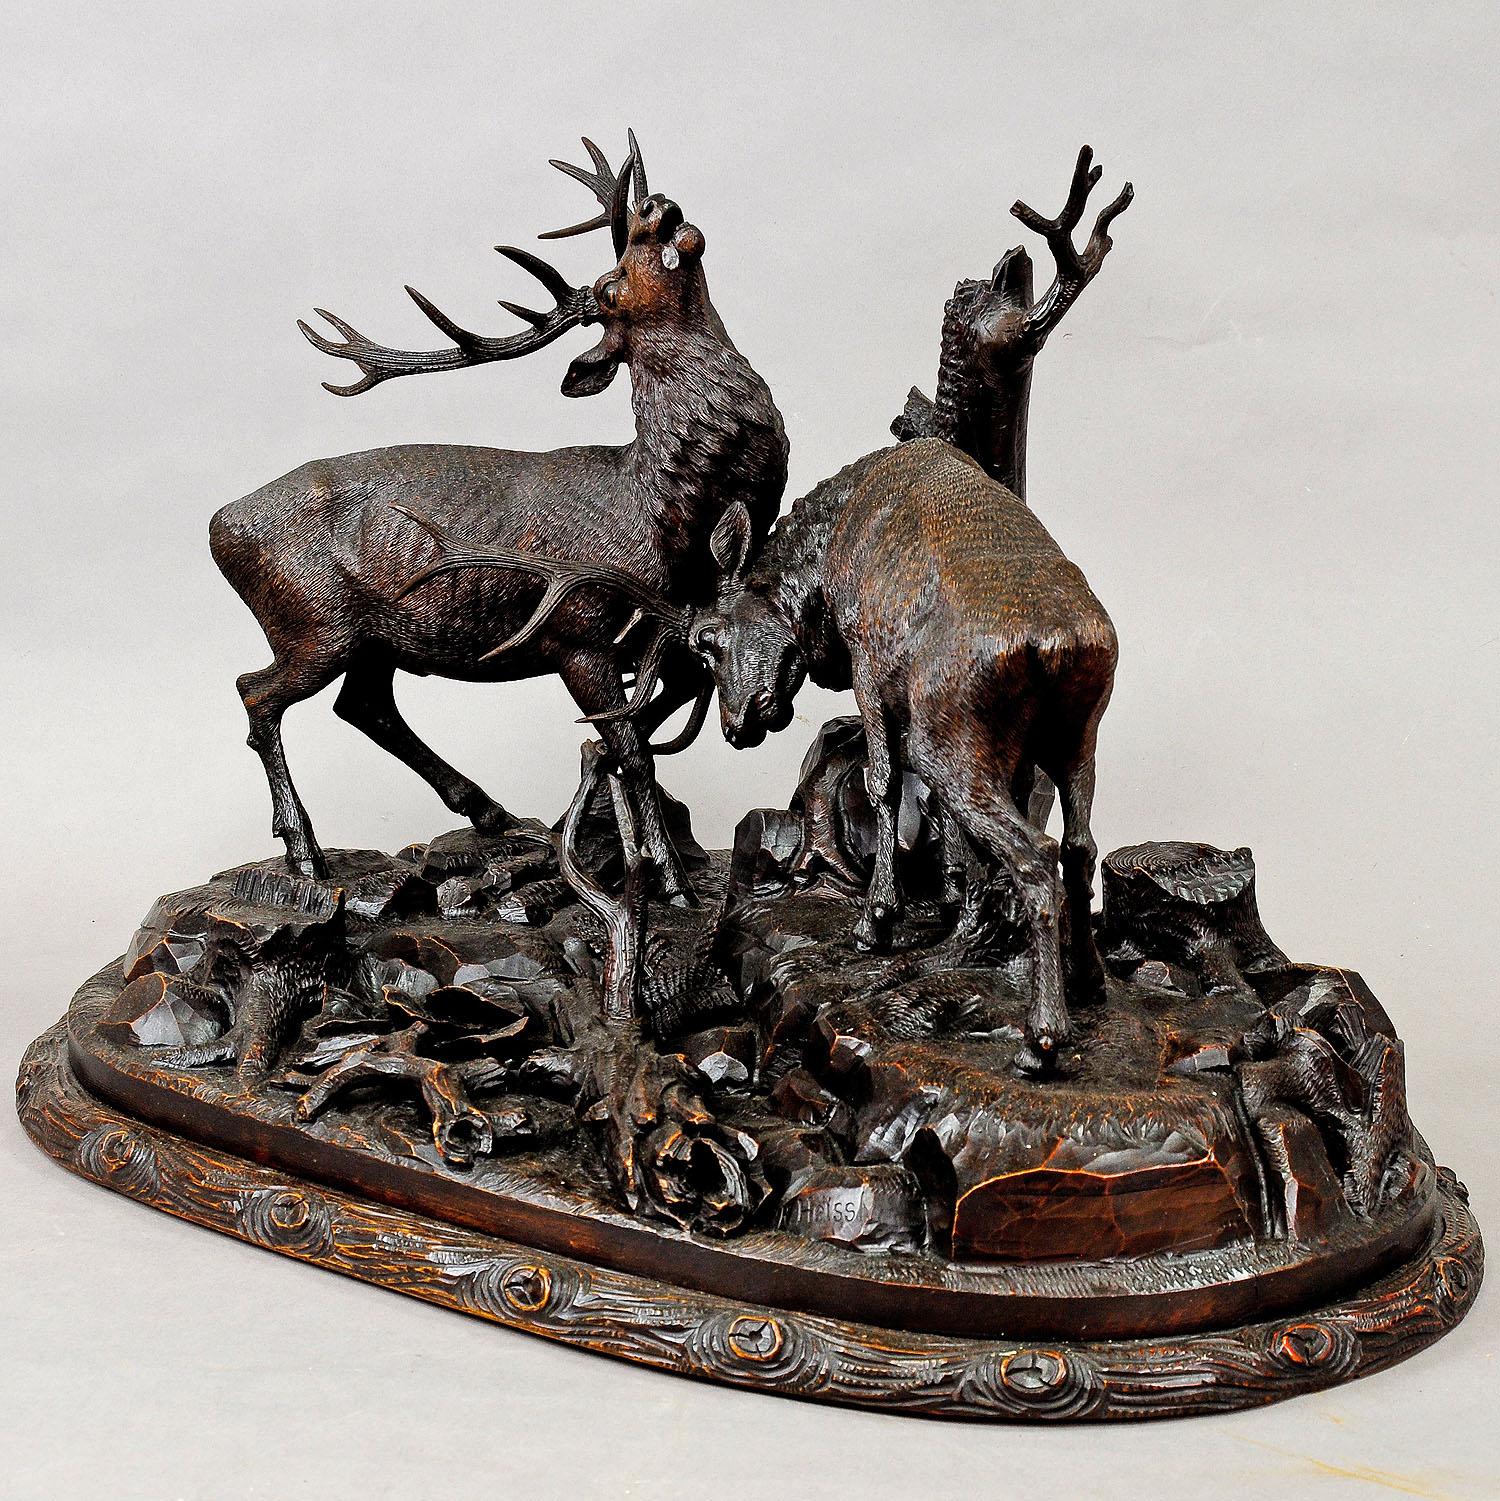 Large Carved Wood Fighting Stags by Rudolph Heissl

An extremely rare, grandiose handcarved wood sculpture. The two fighting stags are on a rocky base with three stumps.  A very detailed natural carving by the Austrian woodcarver Rudolph Heissl